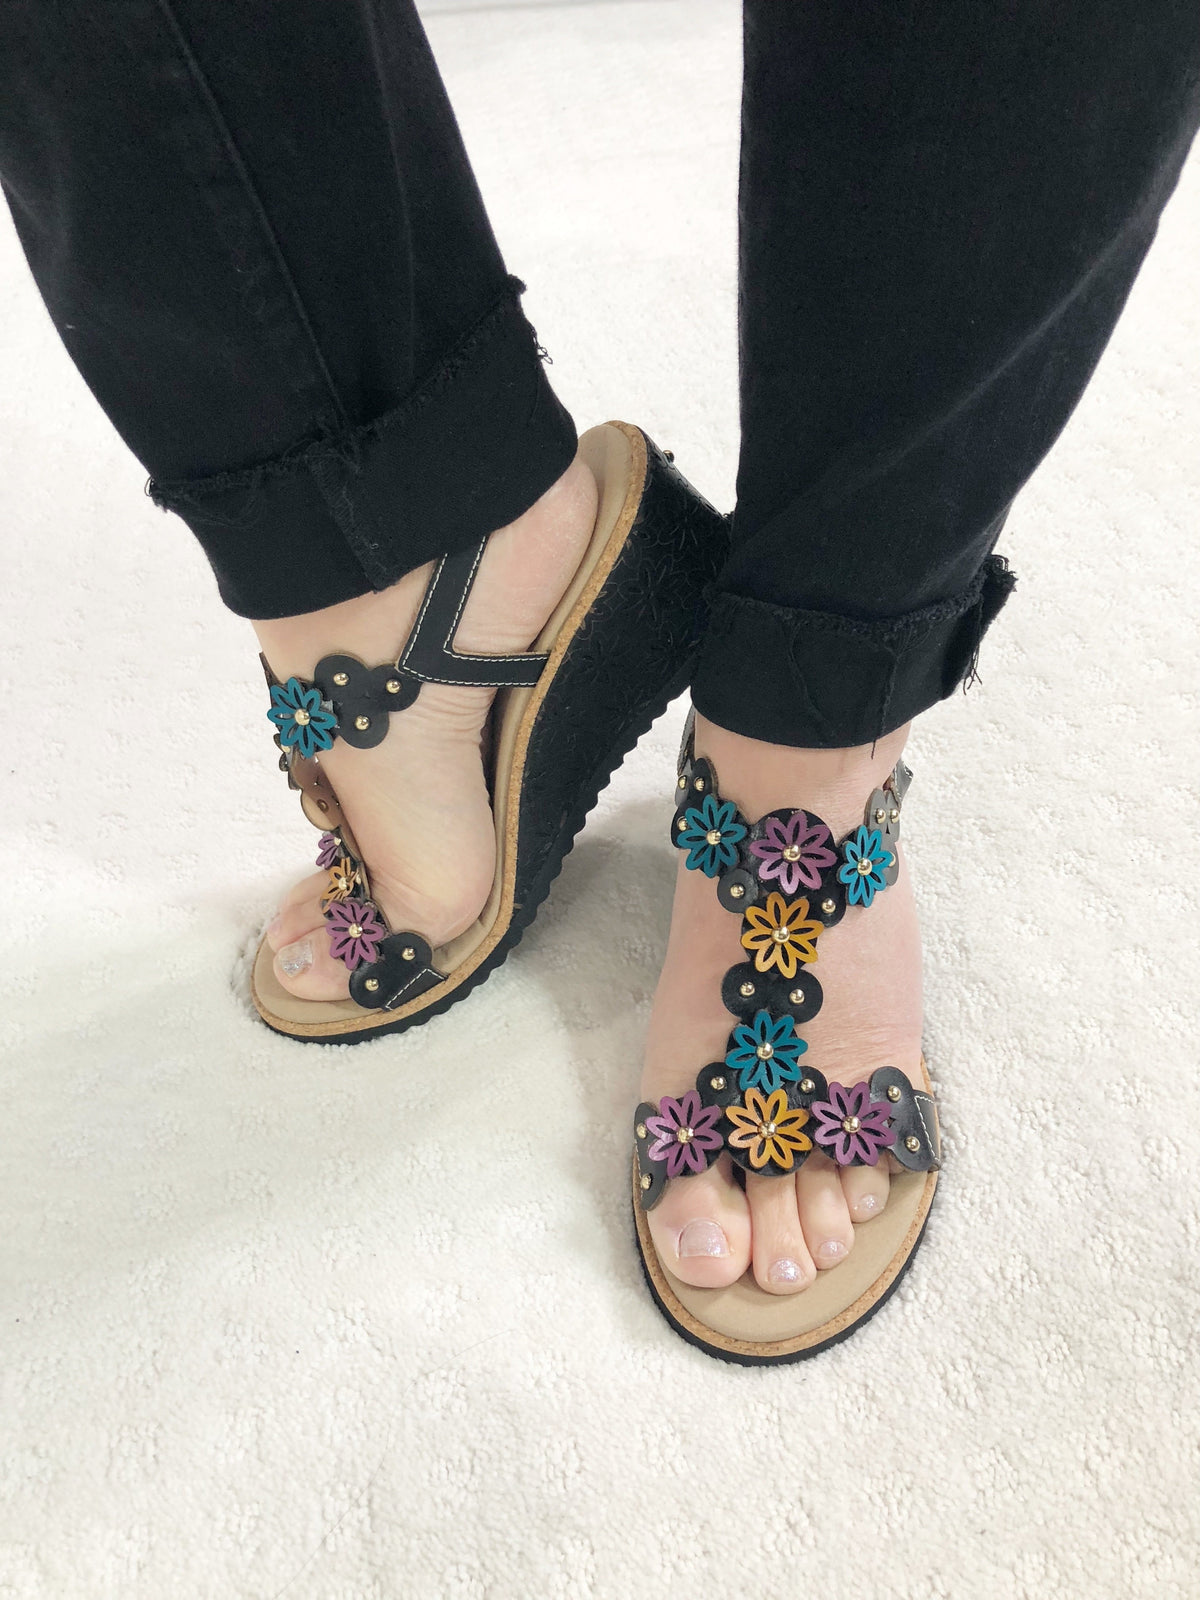 Stylish and comfortable T-strap leather wedge sandal called Wellesta by L'Artiste Springstep Footwear featuring a blend of geometrical and flowers detail upper dusted with round gold studs, a functional ankle straps buckle for adjustability and laser cut-out wrapped wedge with a cork trim edge.